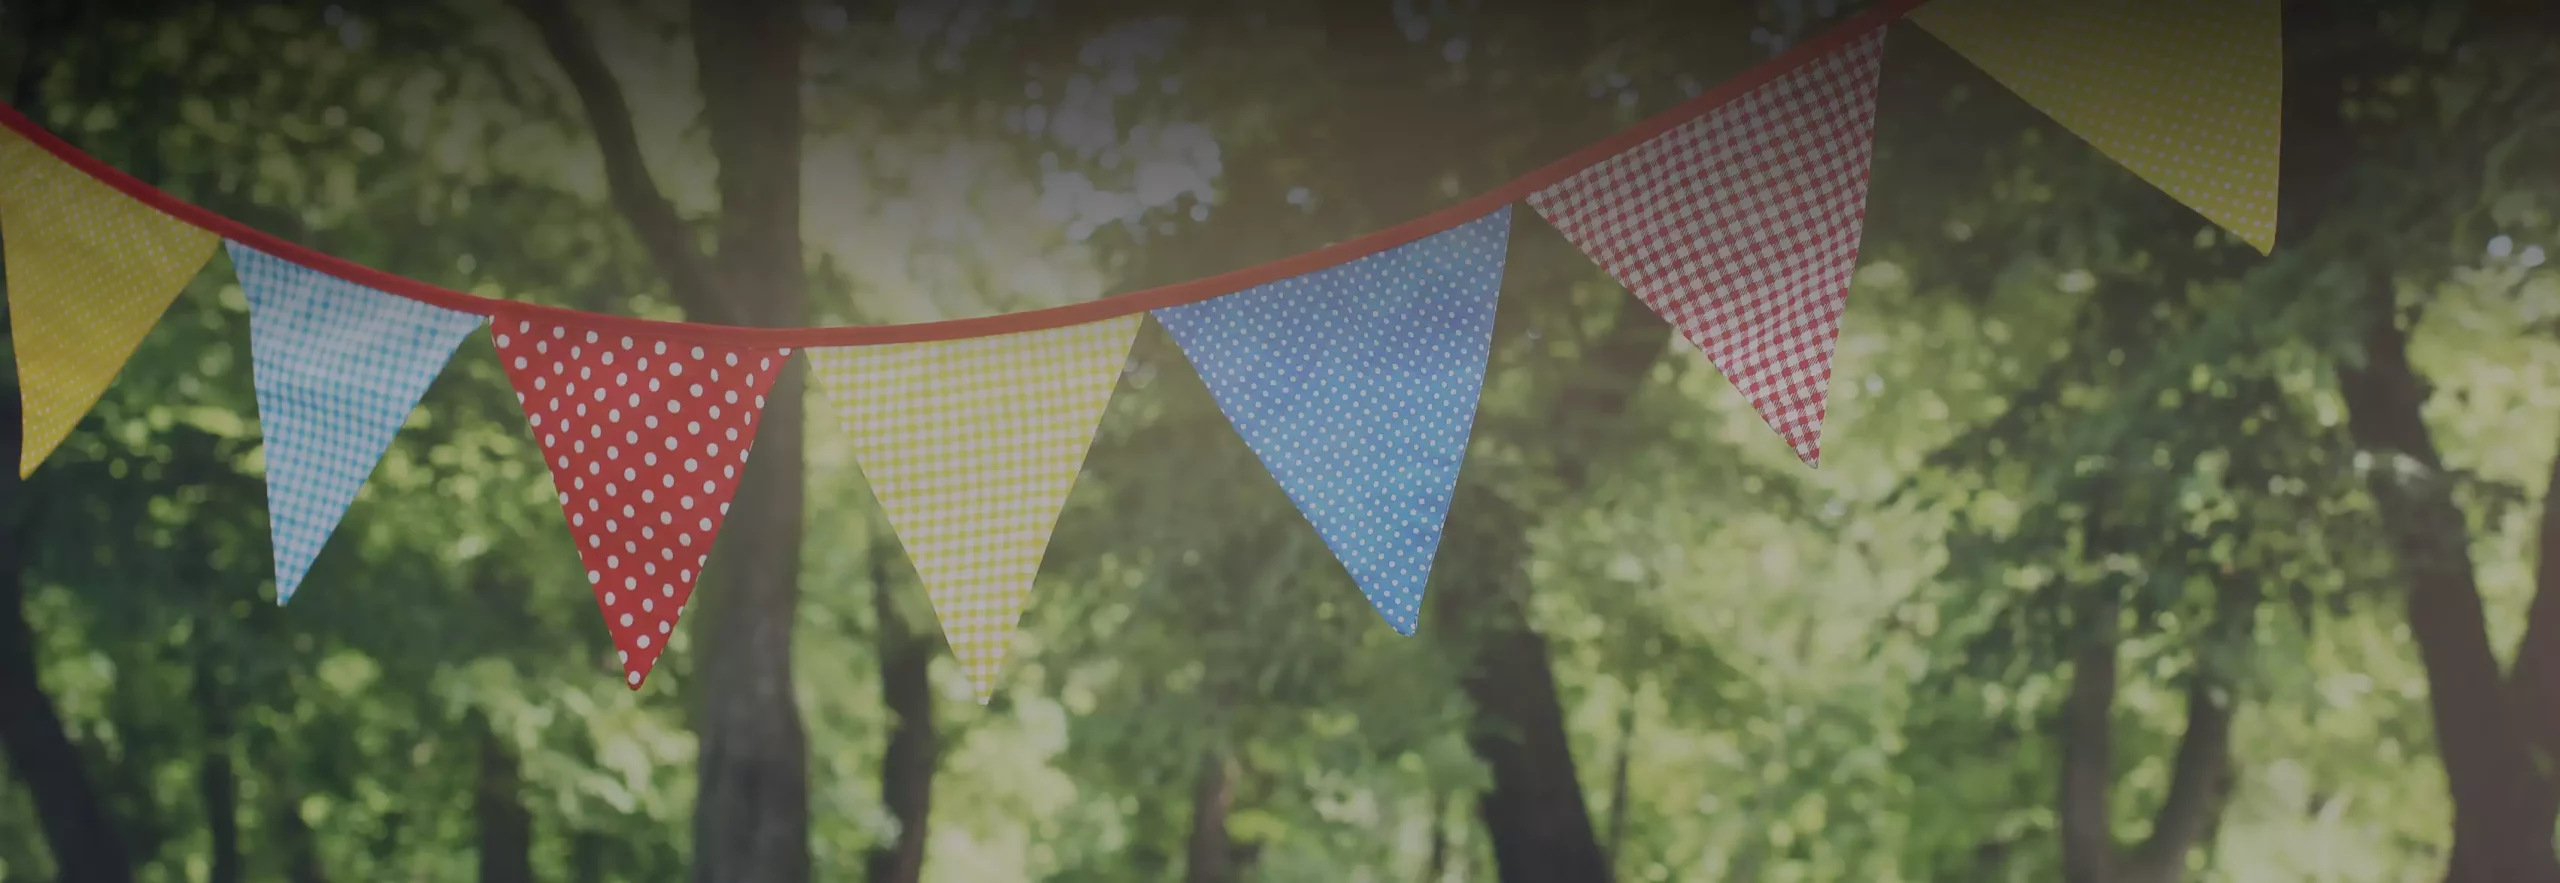 Bunting hanging in an orchard